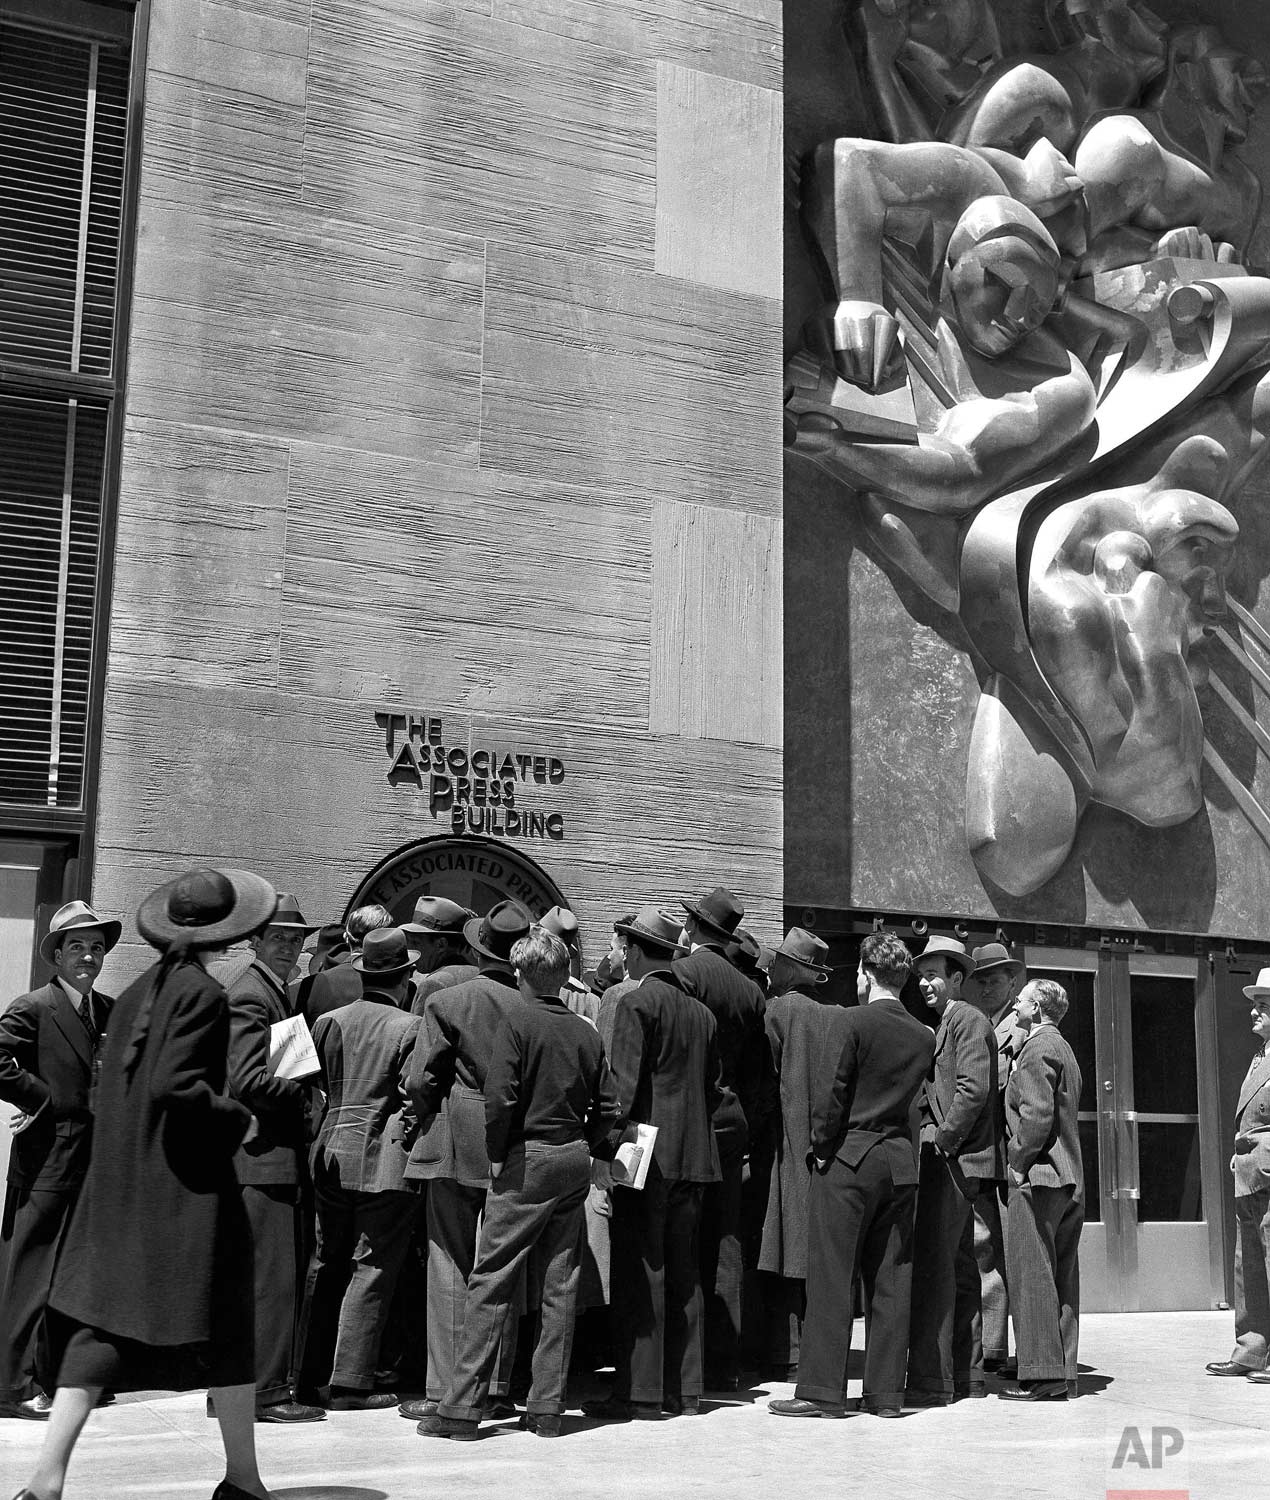  People surround the teletype machine at the Associated Press Building on Rockefeller Plaza in New York City, May 10, 1940. (AP Photo/Robert Kradin) 